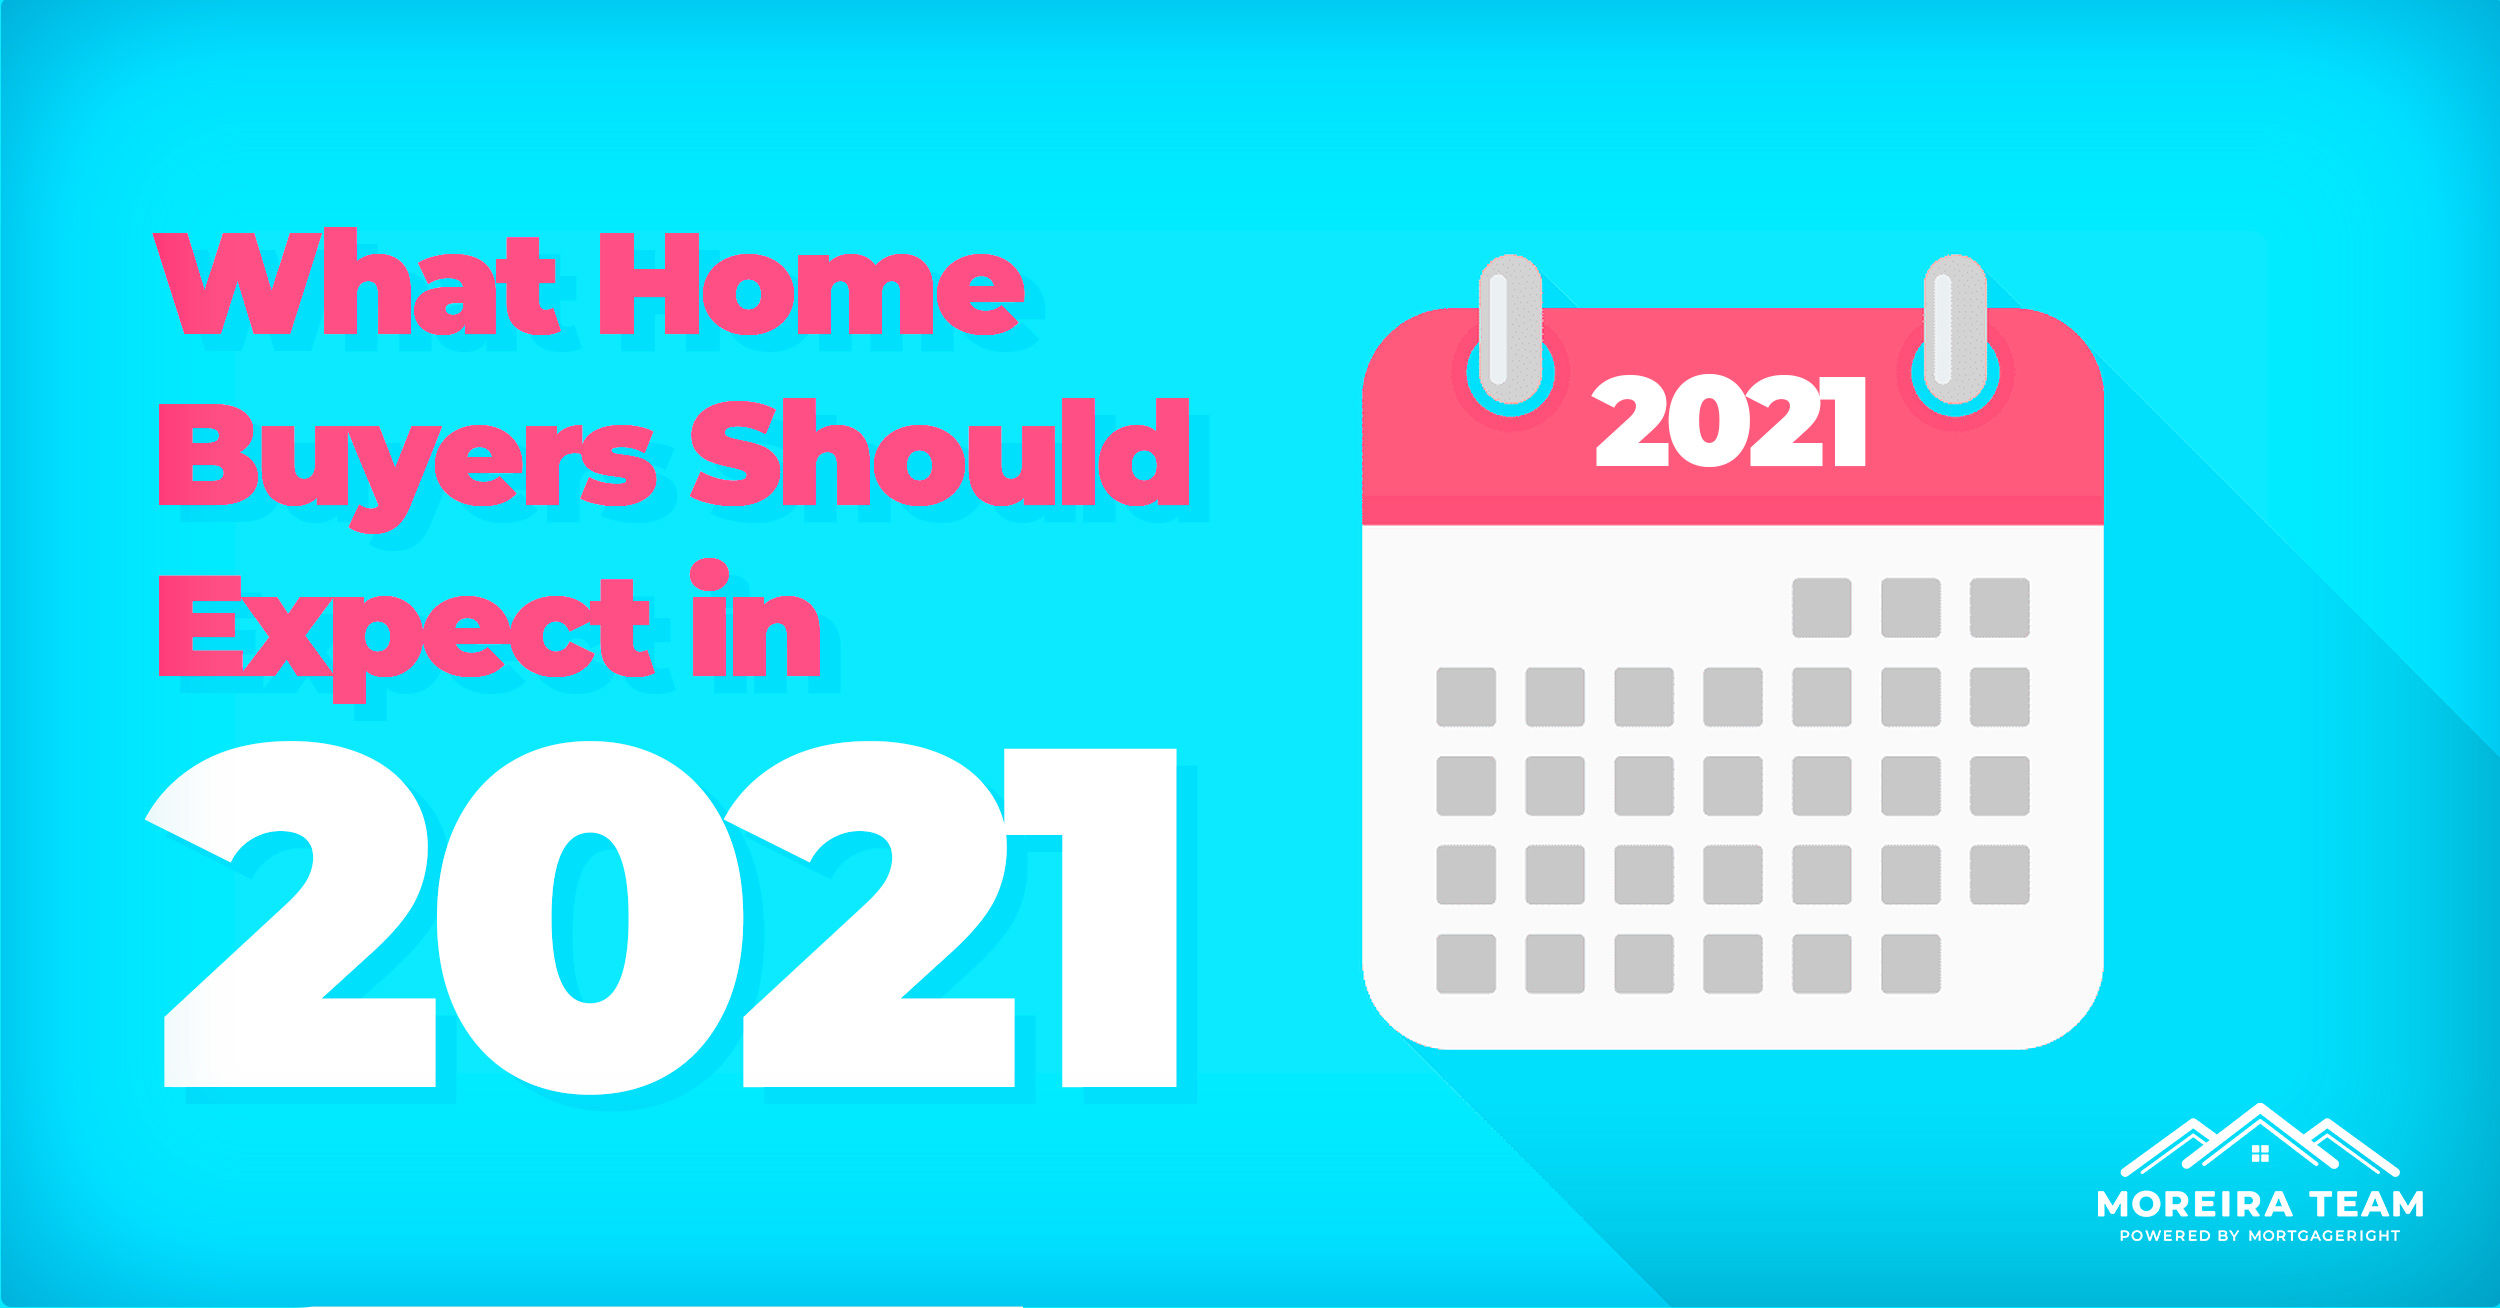 Home Buyer Expectations in 2021